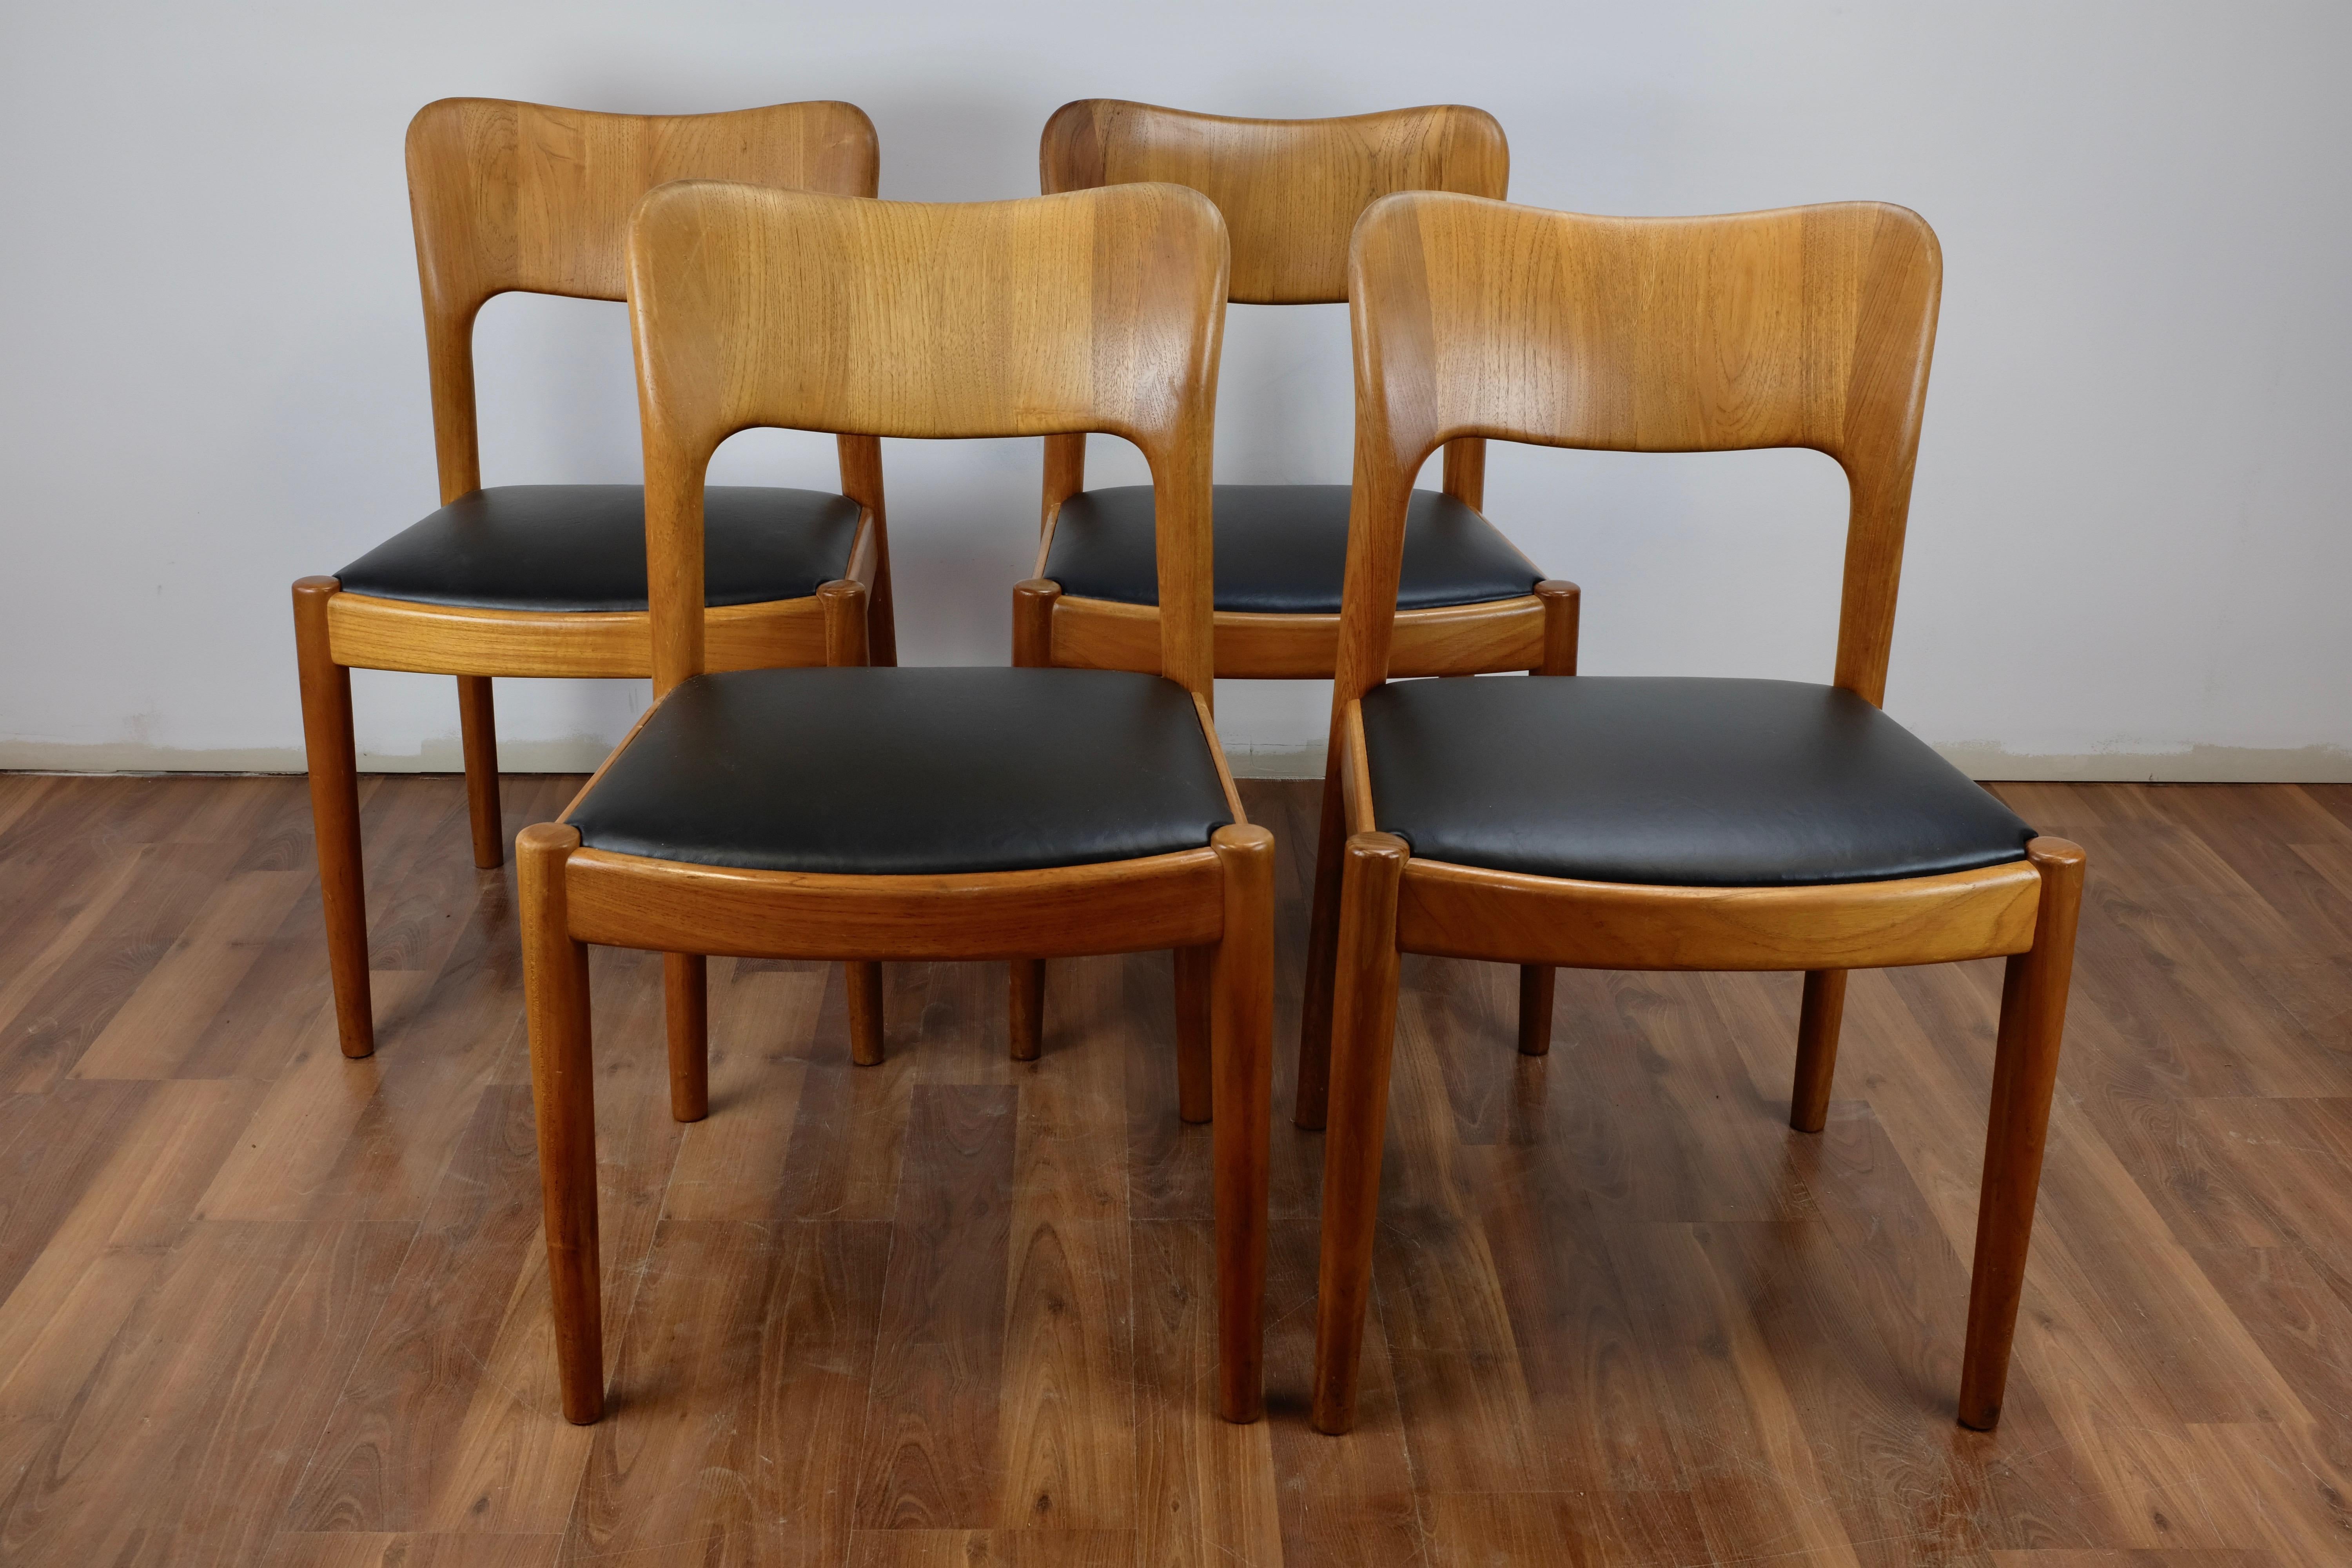 Set of 4 teak Ole dining chairs designed by John Mortensen and made in Denmark by Koefoed-Hornslet. 

Constructed of solid teak and in excellent condition with new black leatherette upholstery.